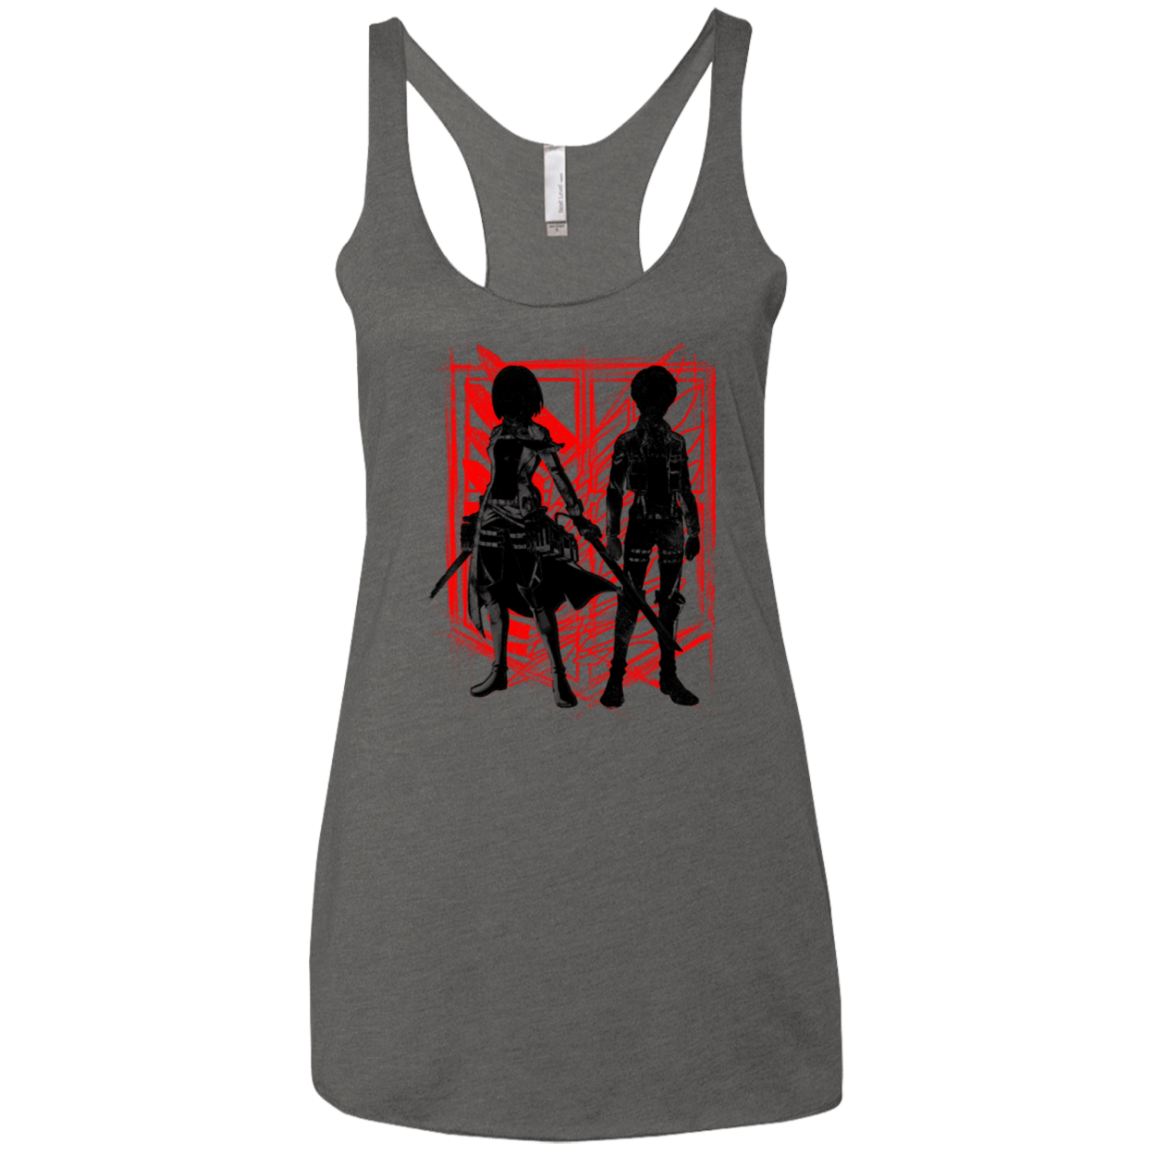 Our Only Hope Women's Triblend Racerback Tank